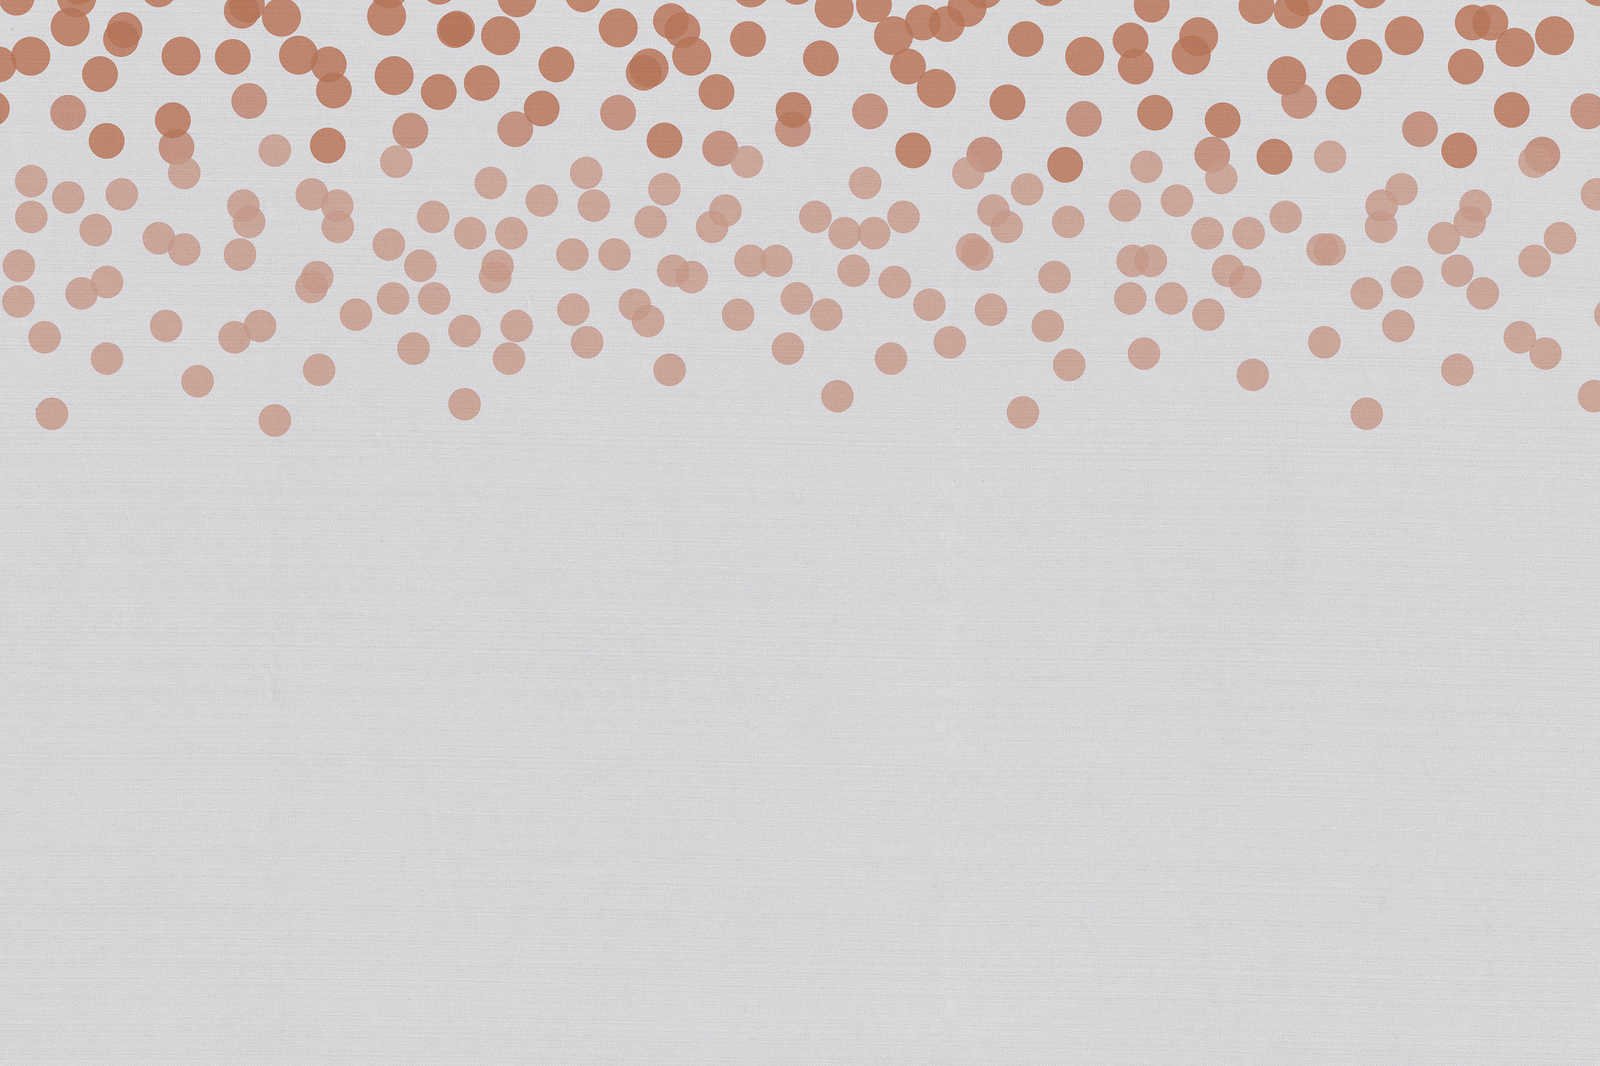             Canvas painting with discreet dot pattern | red, grey - 0.90 m x 0.60 m
        